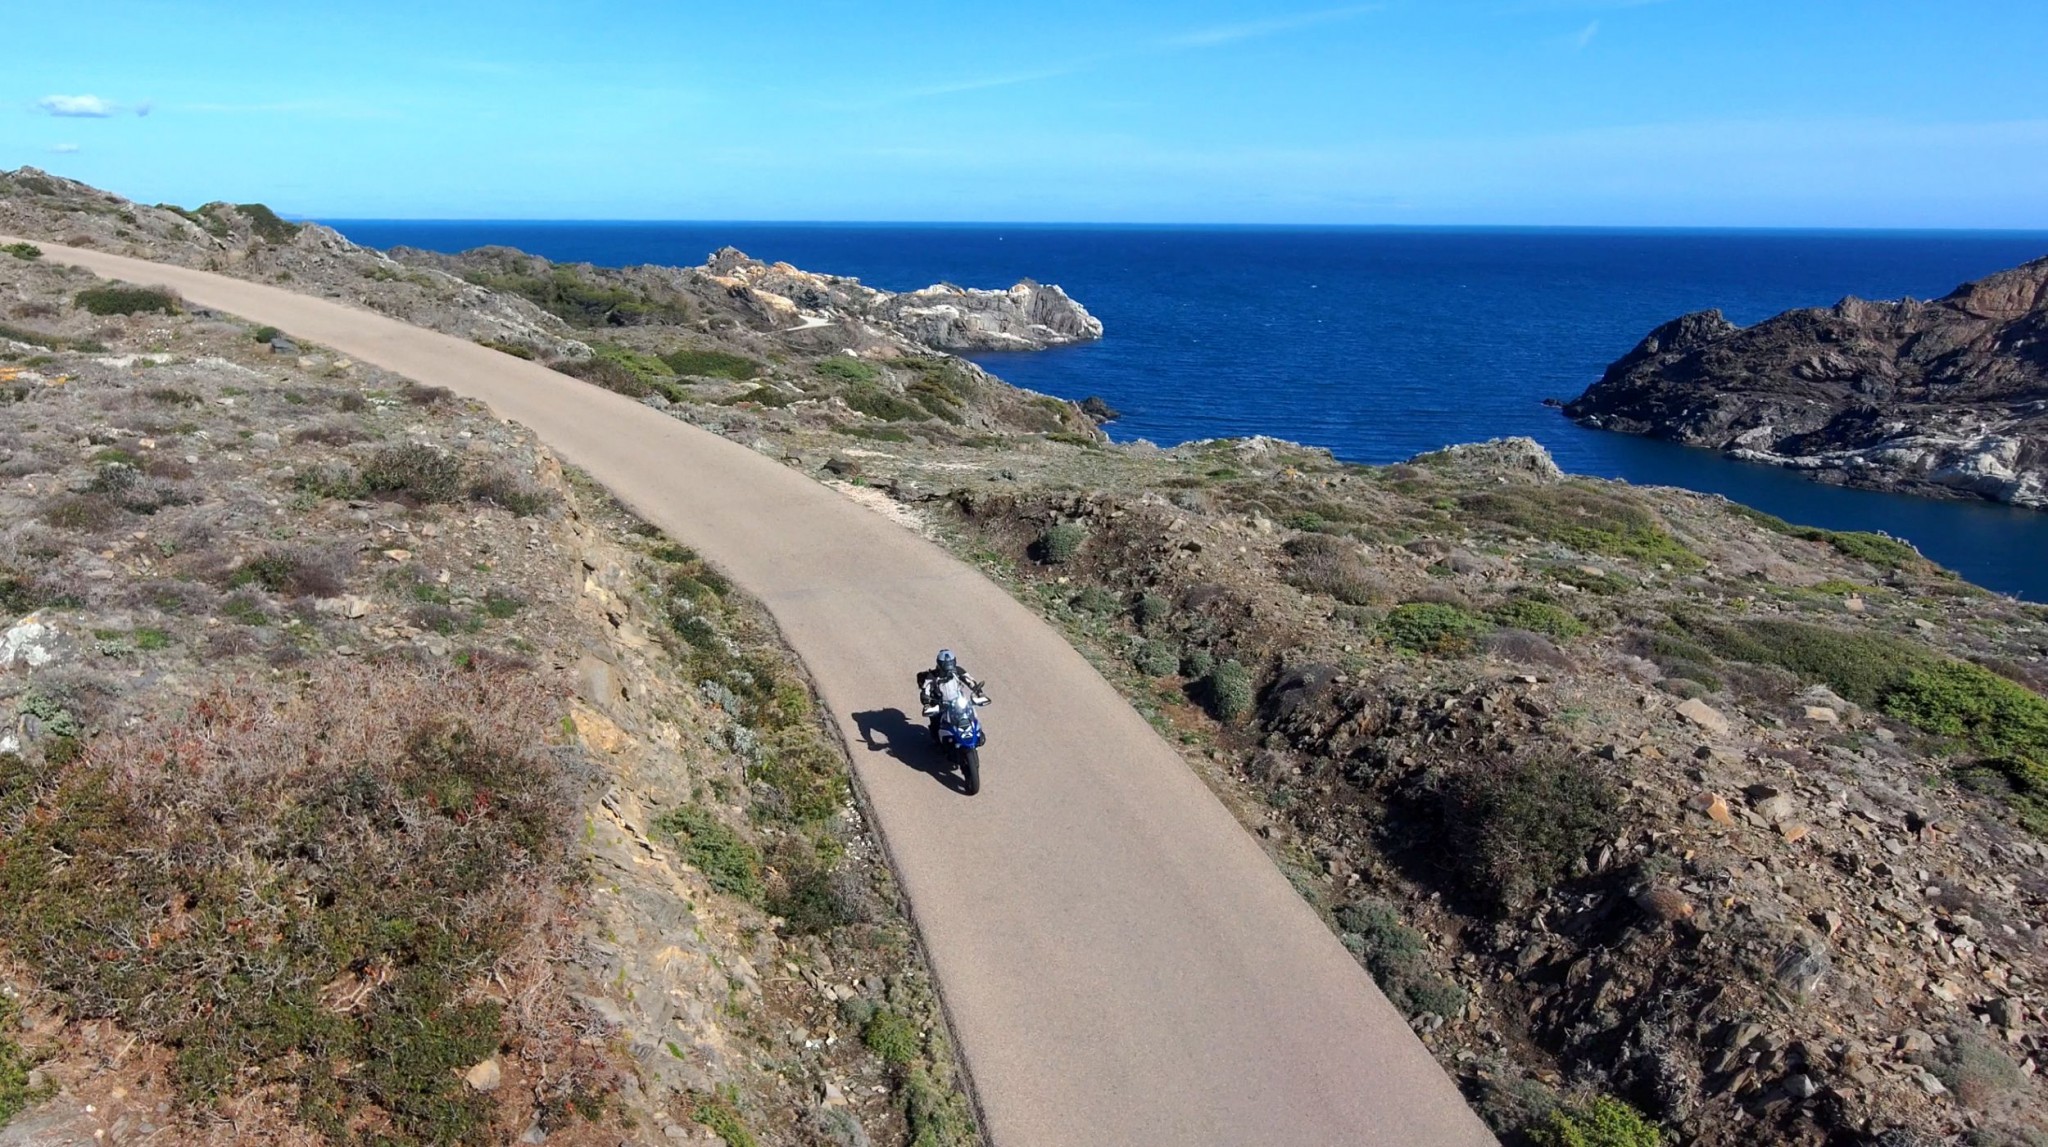 BMW R 1300 GS road test - from Barcelona to Vienna - Image 12